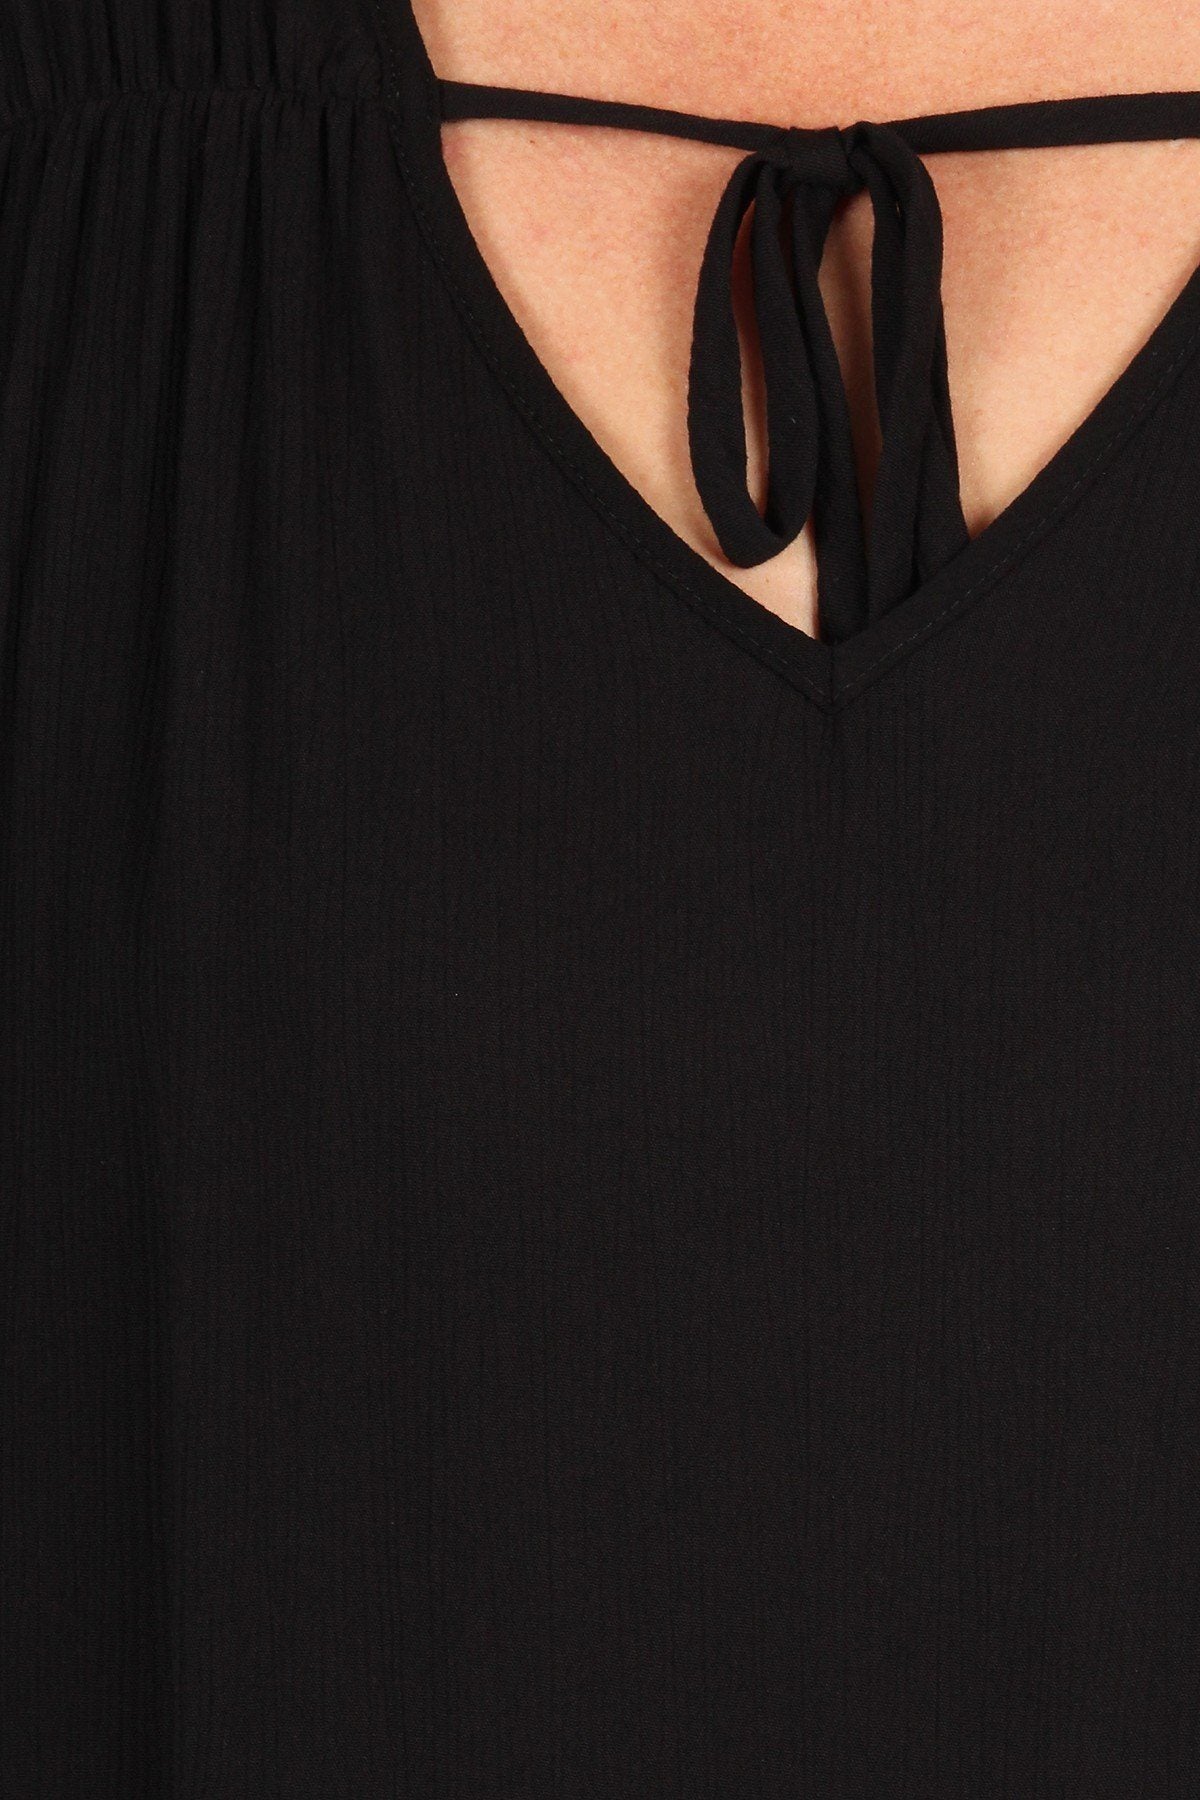 Black Plain with Flutter Sleeves Plus Size Top